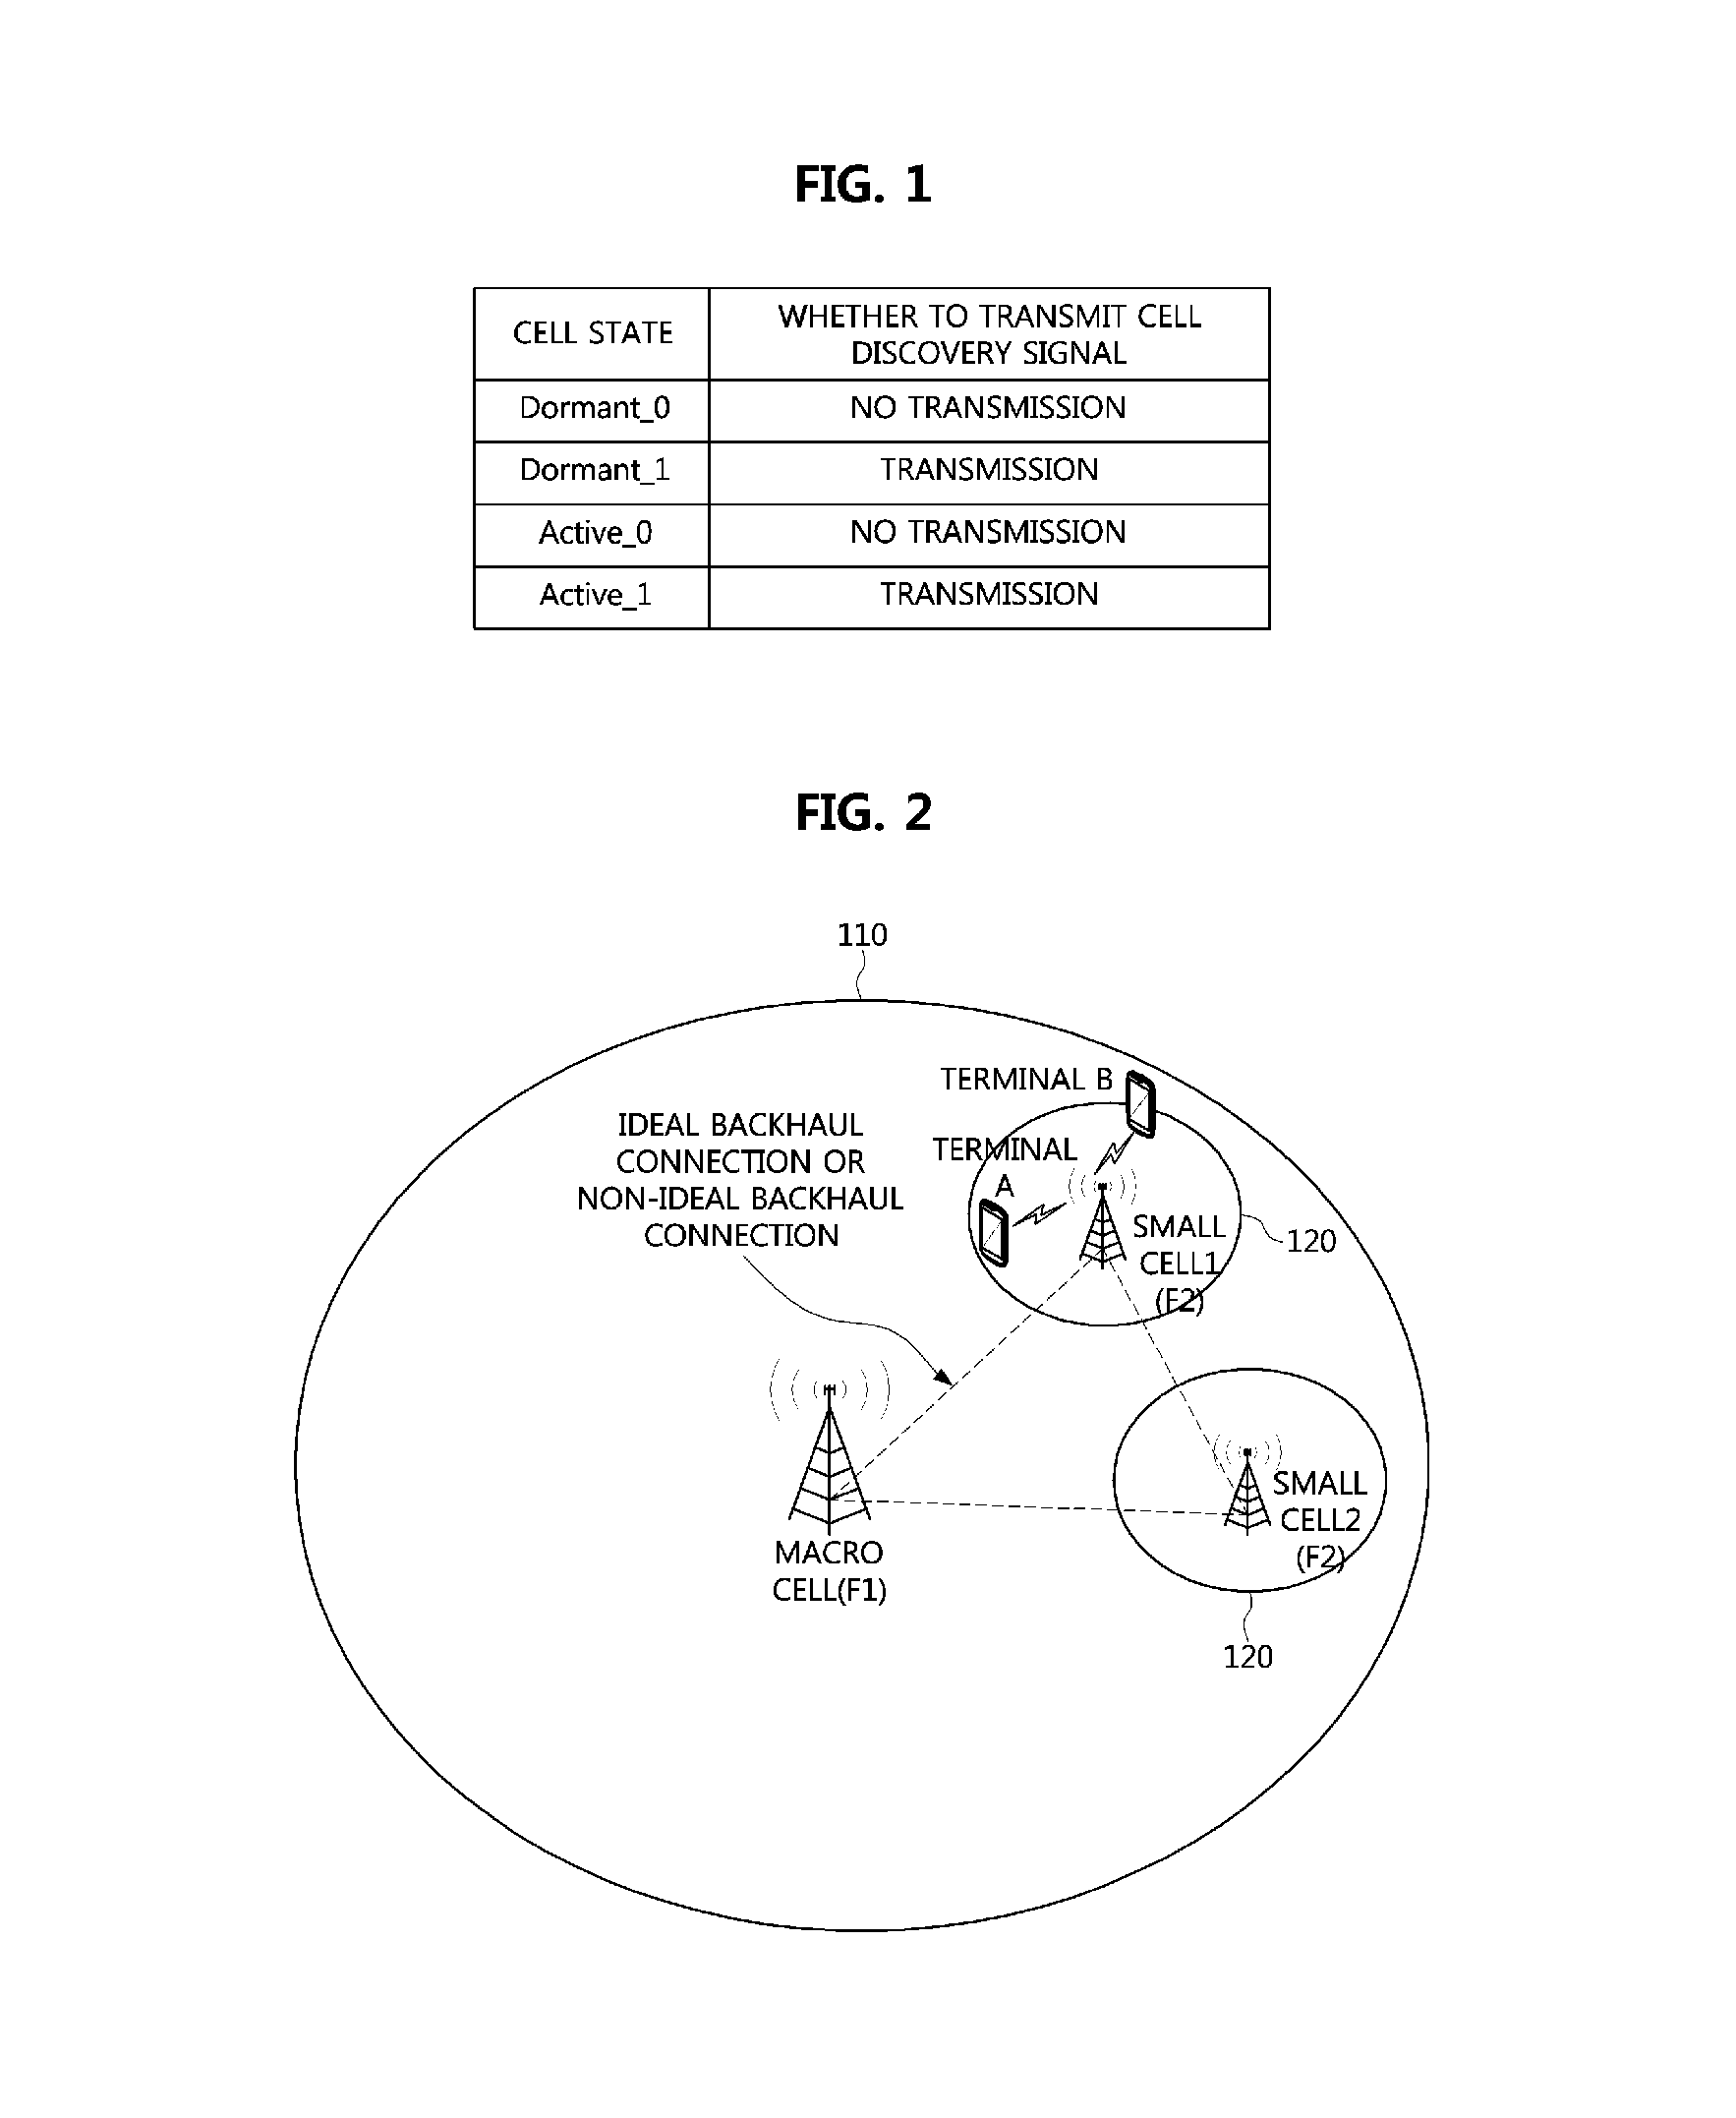 Method for cell discovery